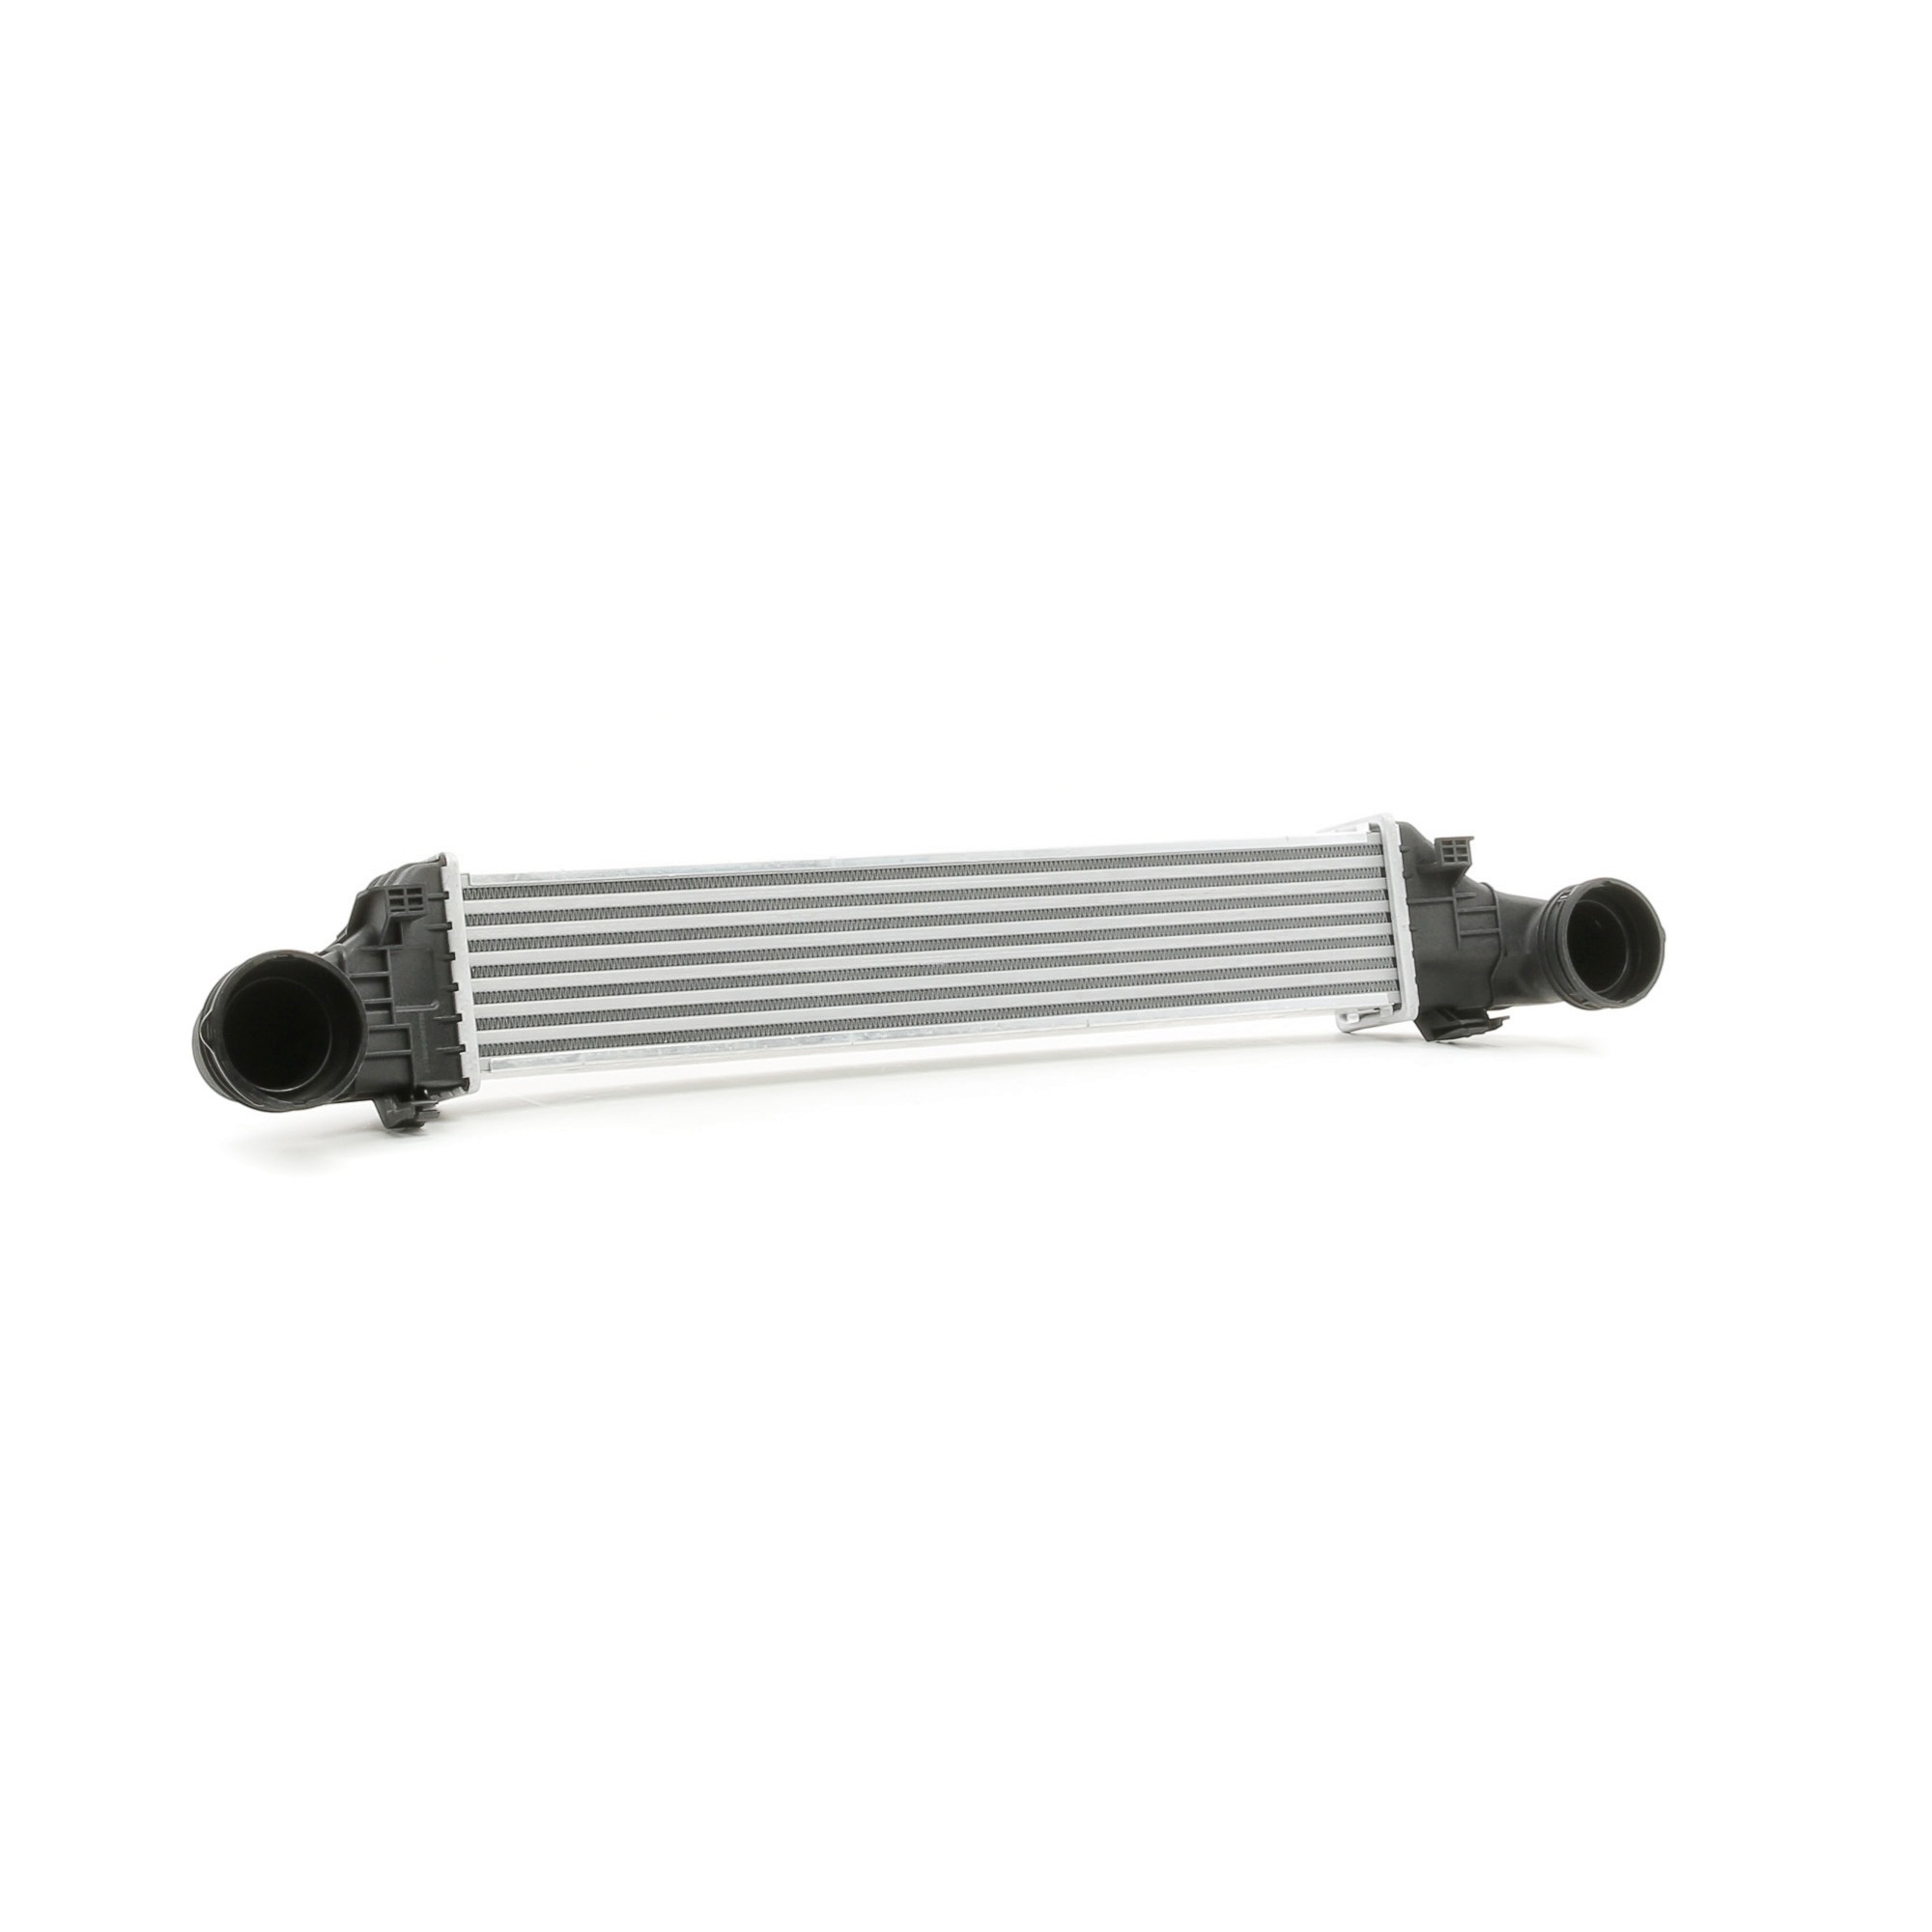 STARK SKICC-0890035 Intercooler with quick couplers